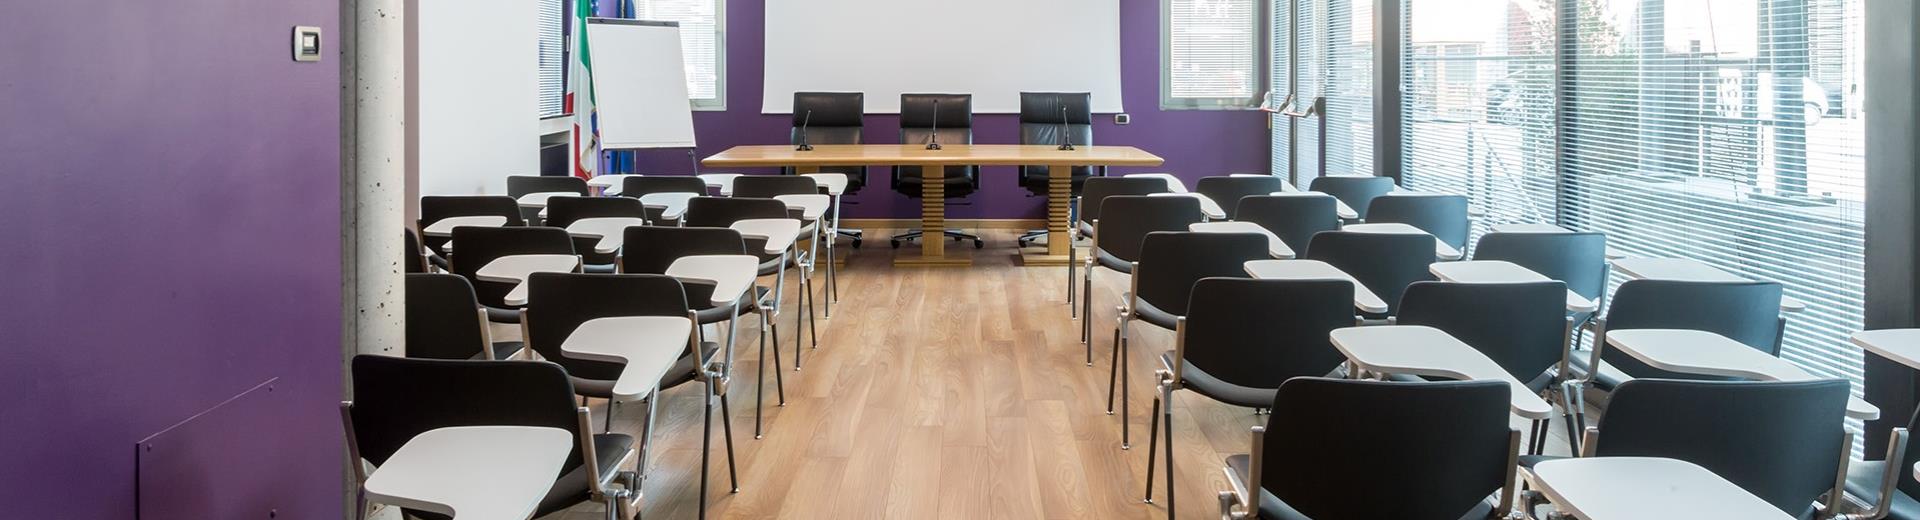 Meeting rooms for events and congresses in Turin Porta Nuova